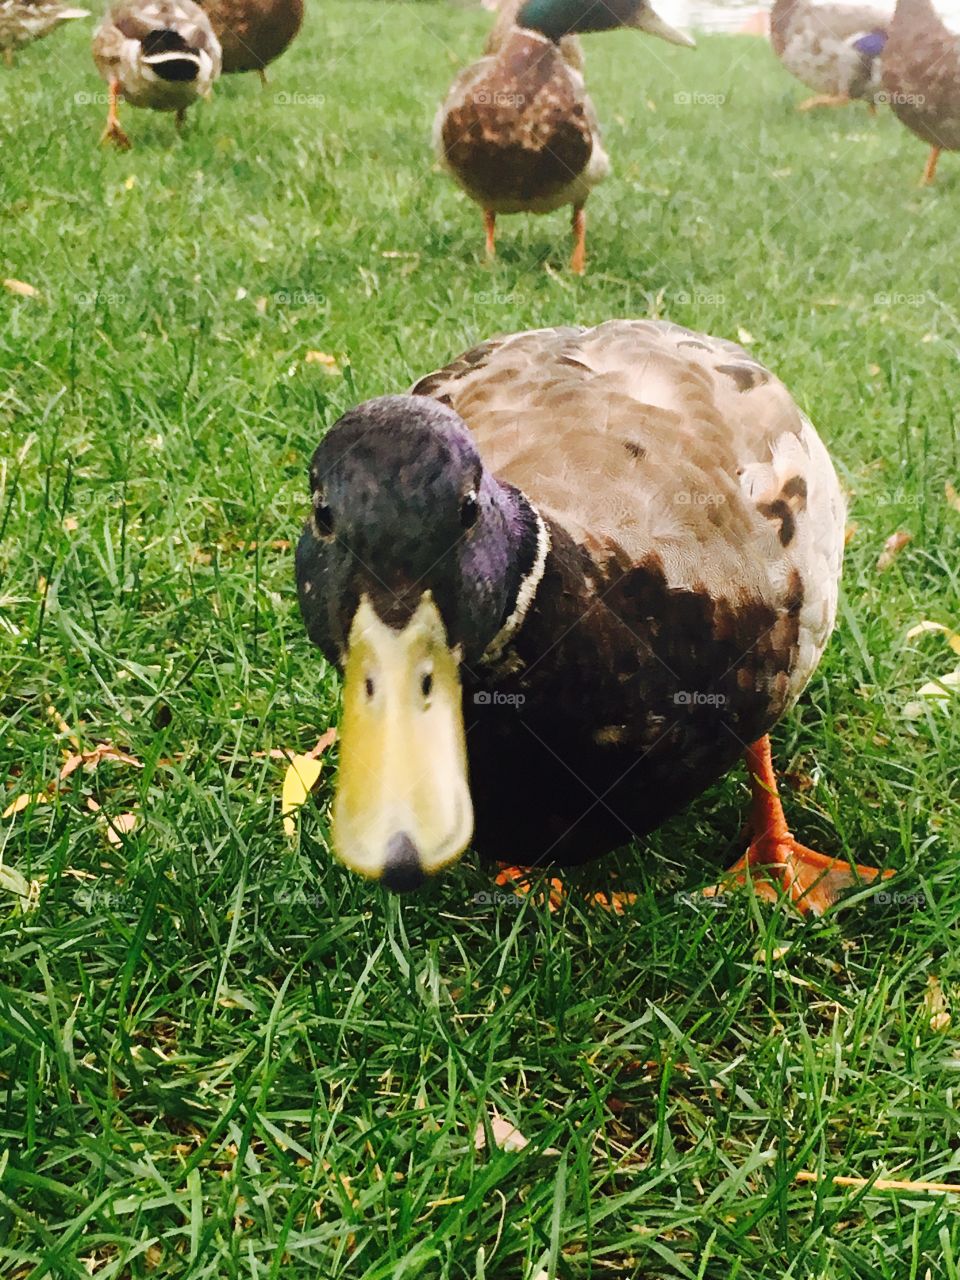 A funny picture of a duck on green grass at the Boston Public Gardens 